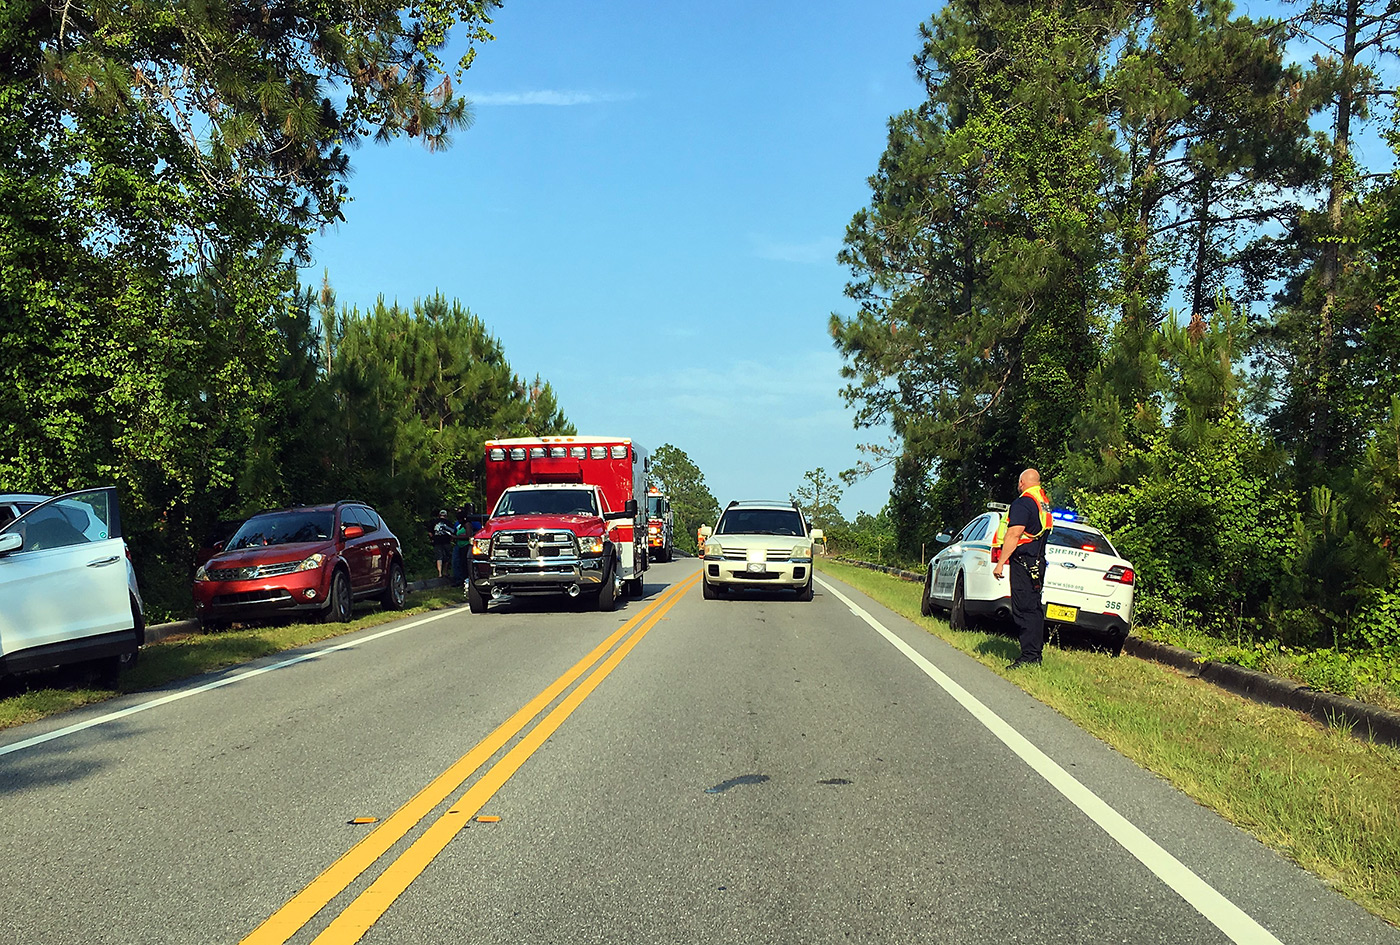 Photo of responders on the scene of a local roadway incident.